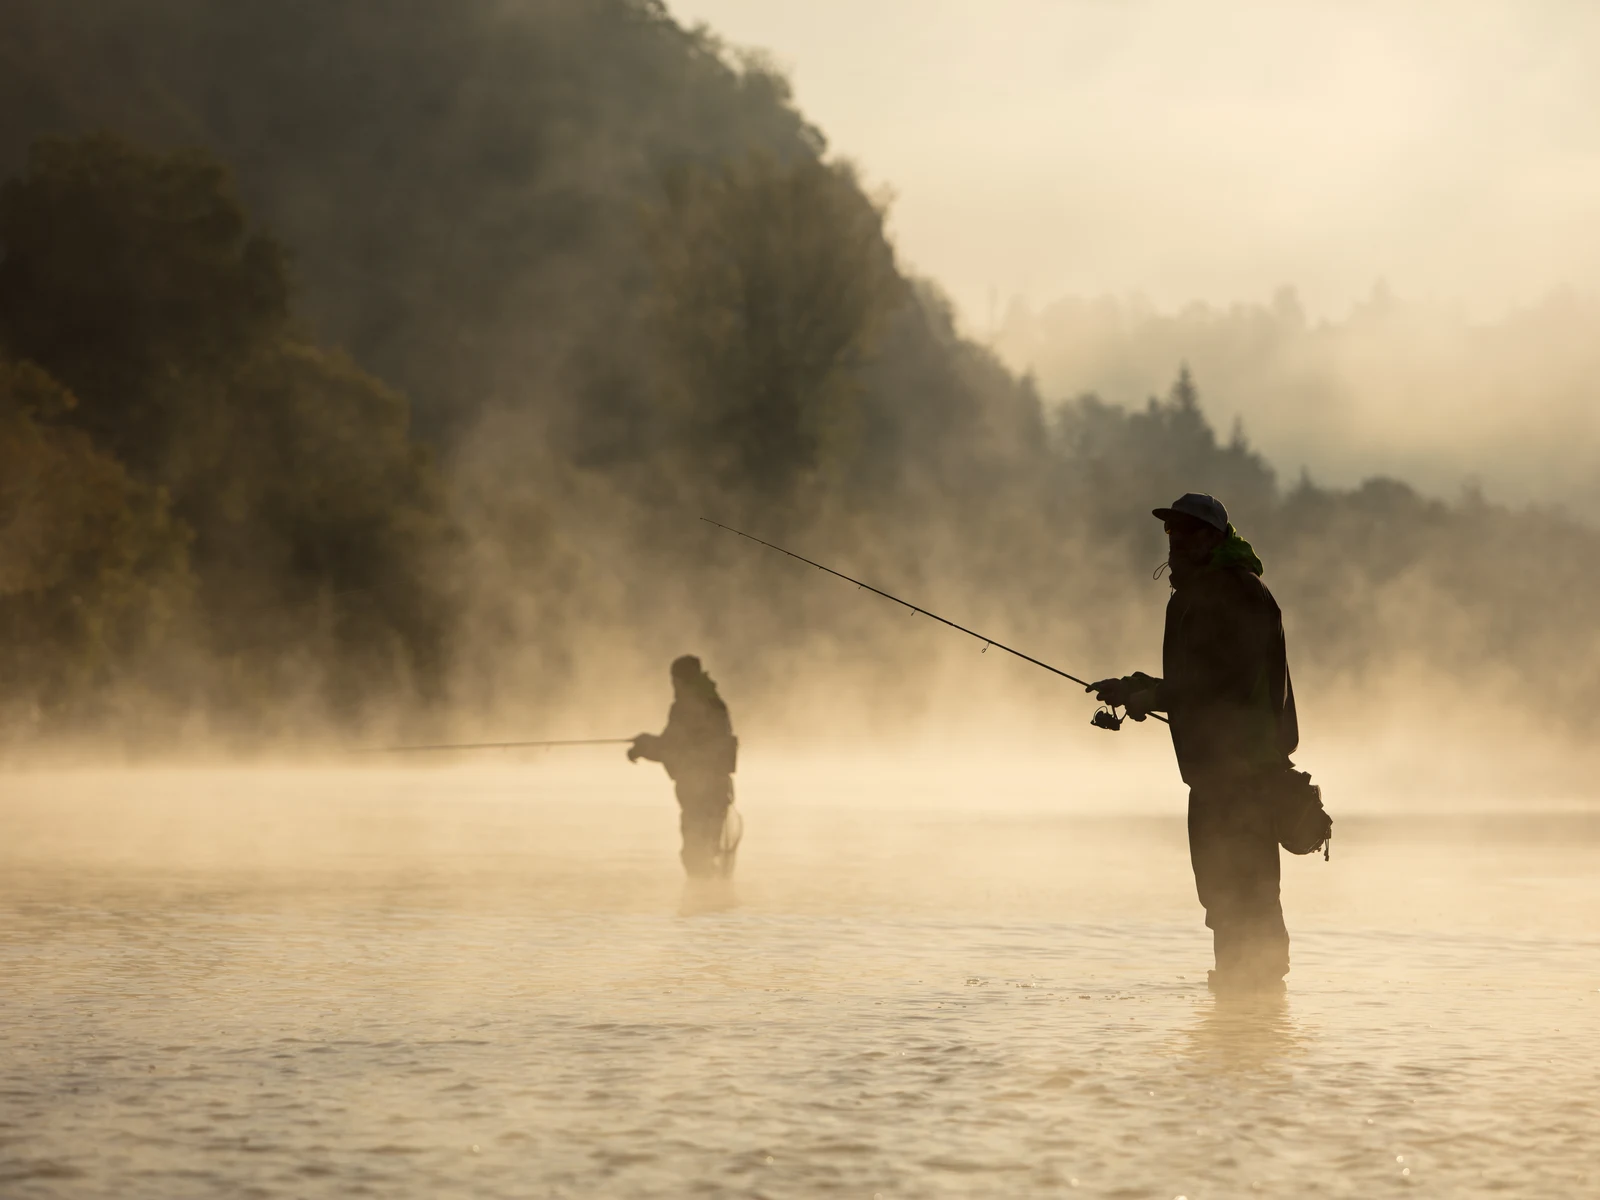 One of the best things to do in Costa Rica, two men photographed fly fishing on a foggy morning